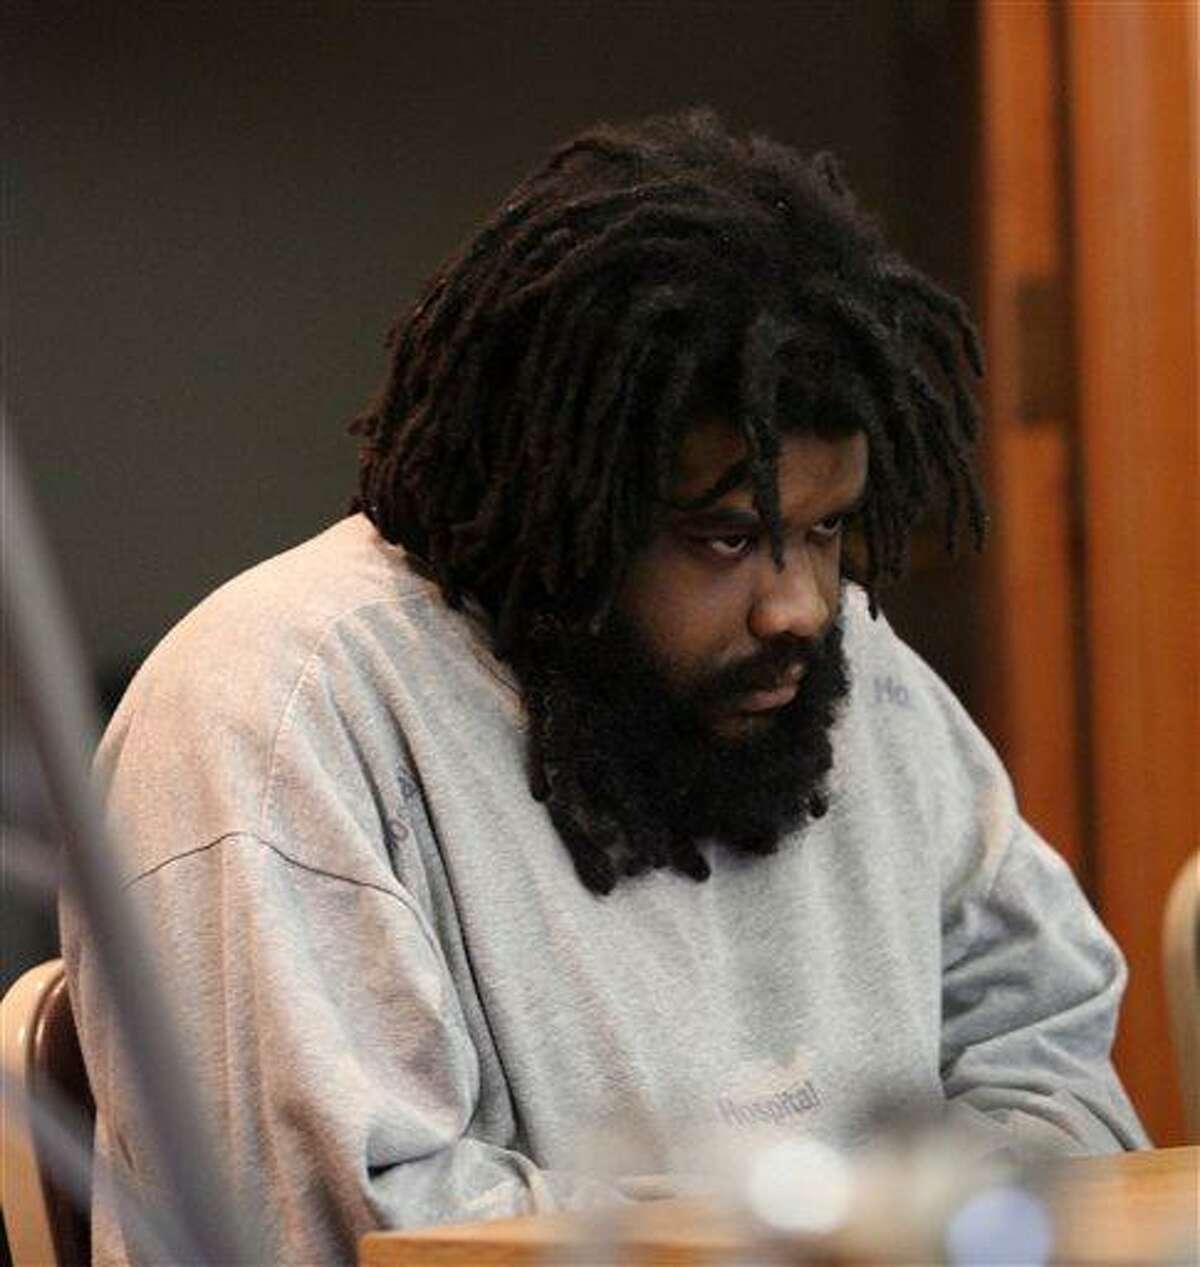 Tyree Smith sits during the first day of his trial before a three judge panel in Bridgeport, Conn., July 1, 2013. Smith is accused of killing and then eating parts of a homeless man in Connecticut. (AP Photo/The Connecticut Post, B.K. Angeletti) MANDATORY CREDIT